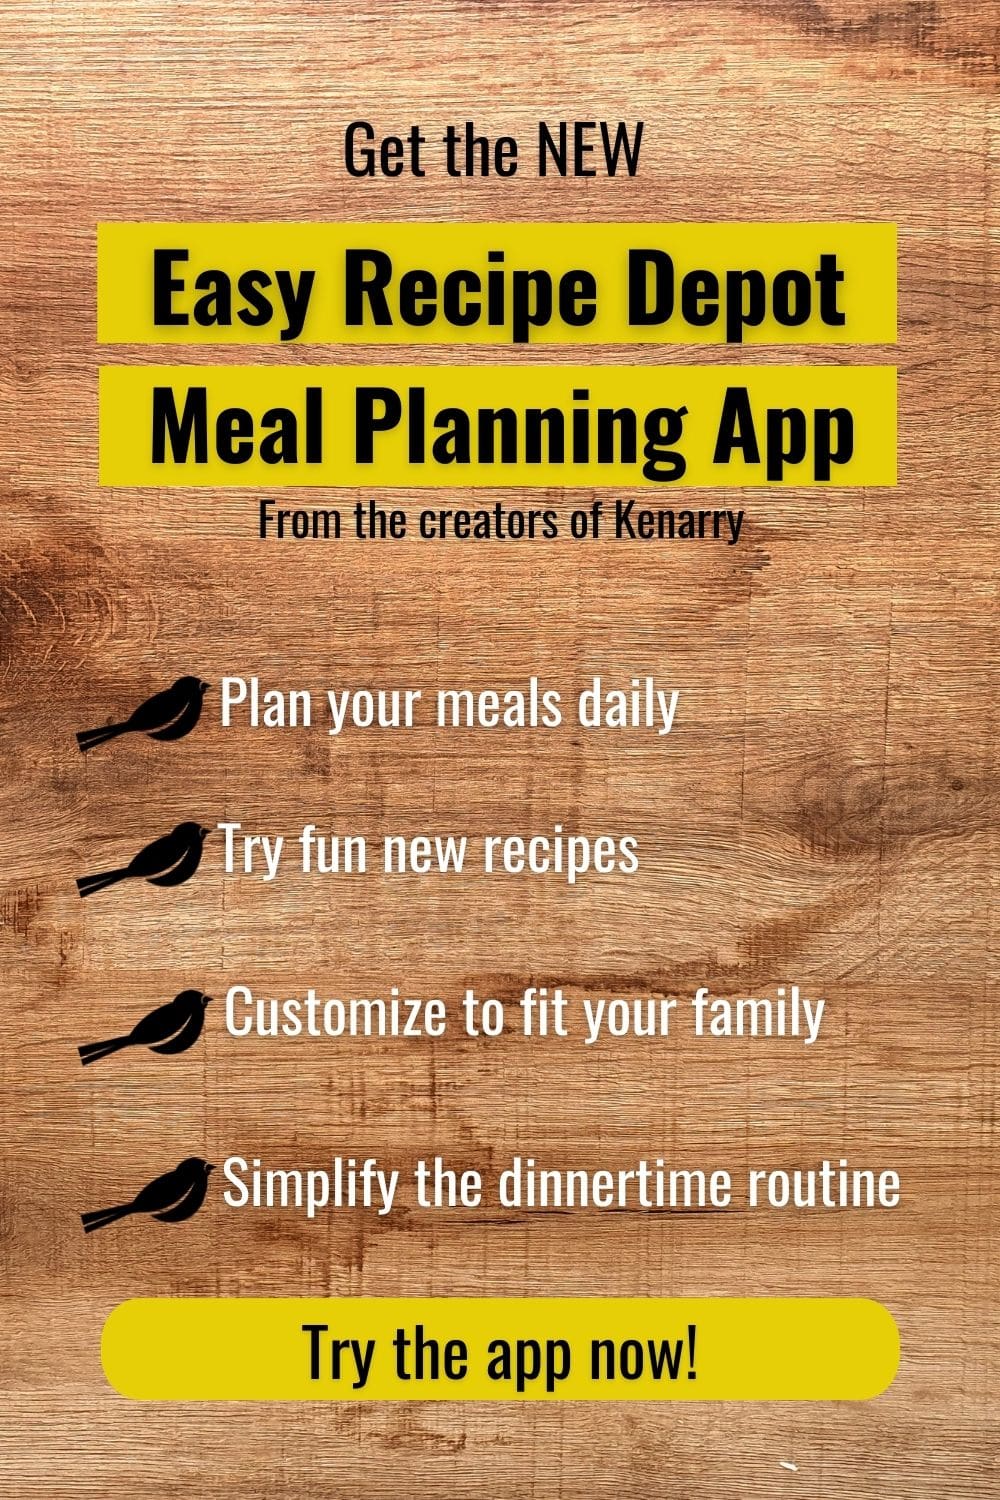 Get the new Easy Recipe Depot meal planning app from the creators of Kenarry.